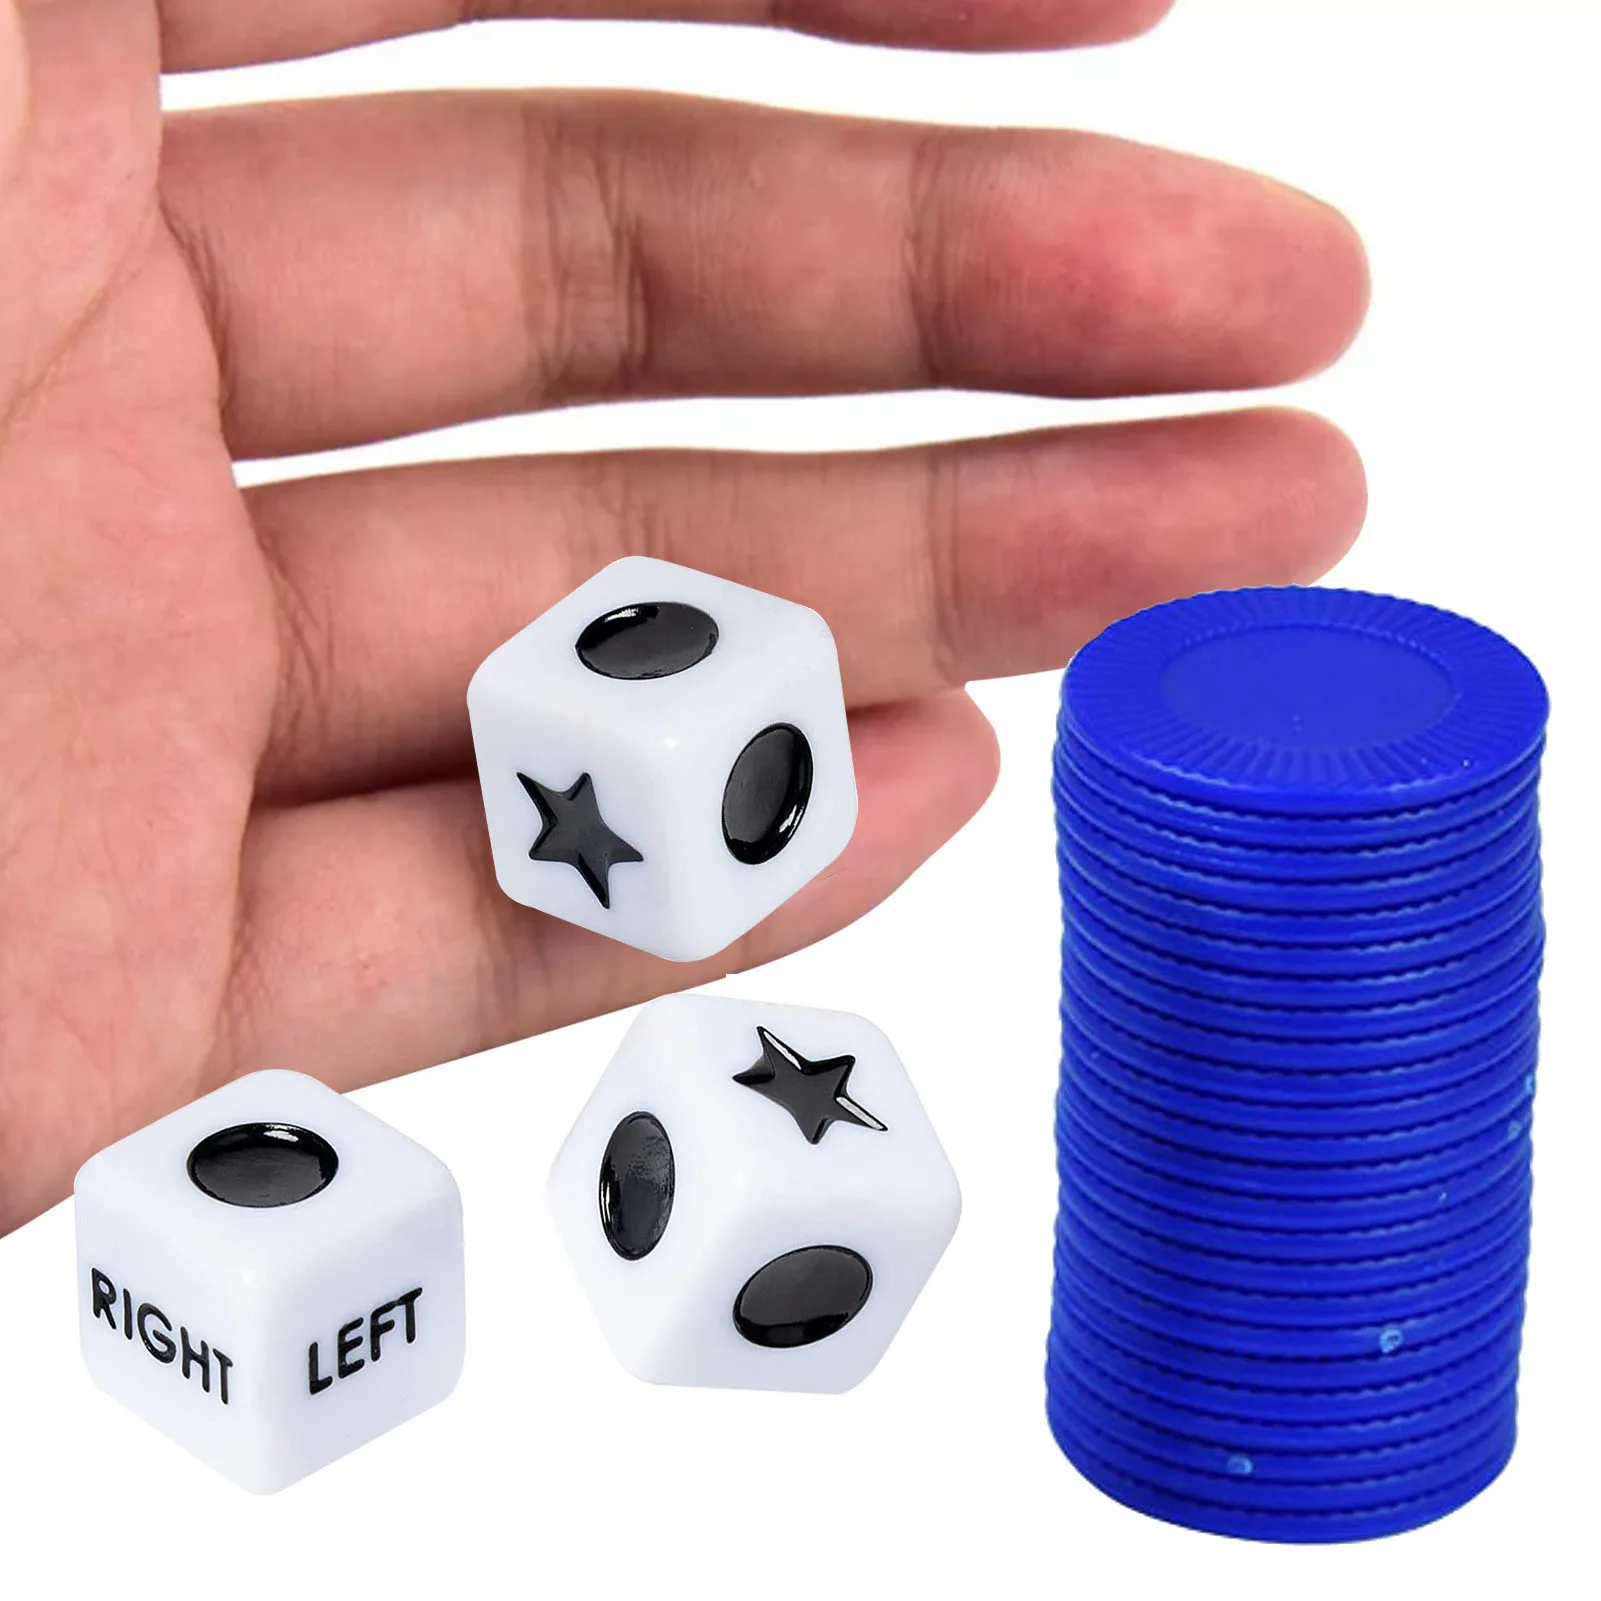 left-right-center-dice-game-innovative-left-right-center-game-fun-indoor-outdoor-family-playing-dice-game-for-kids-teenagers-and